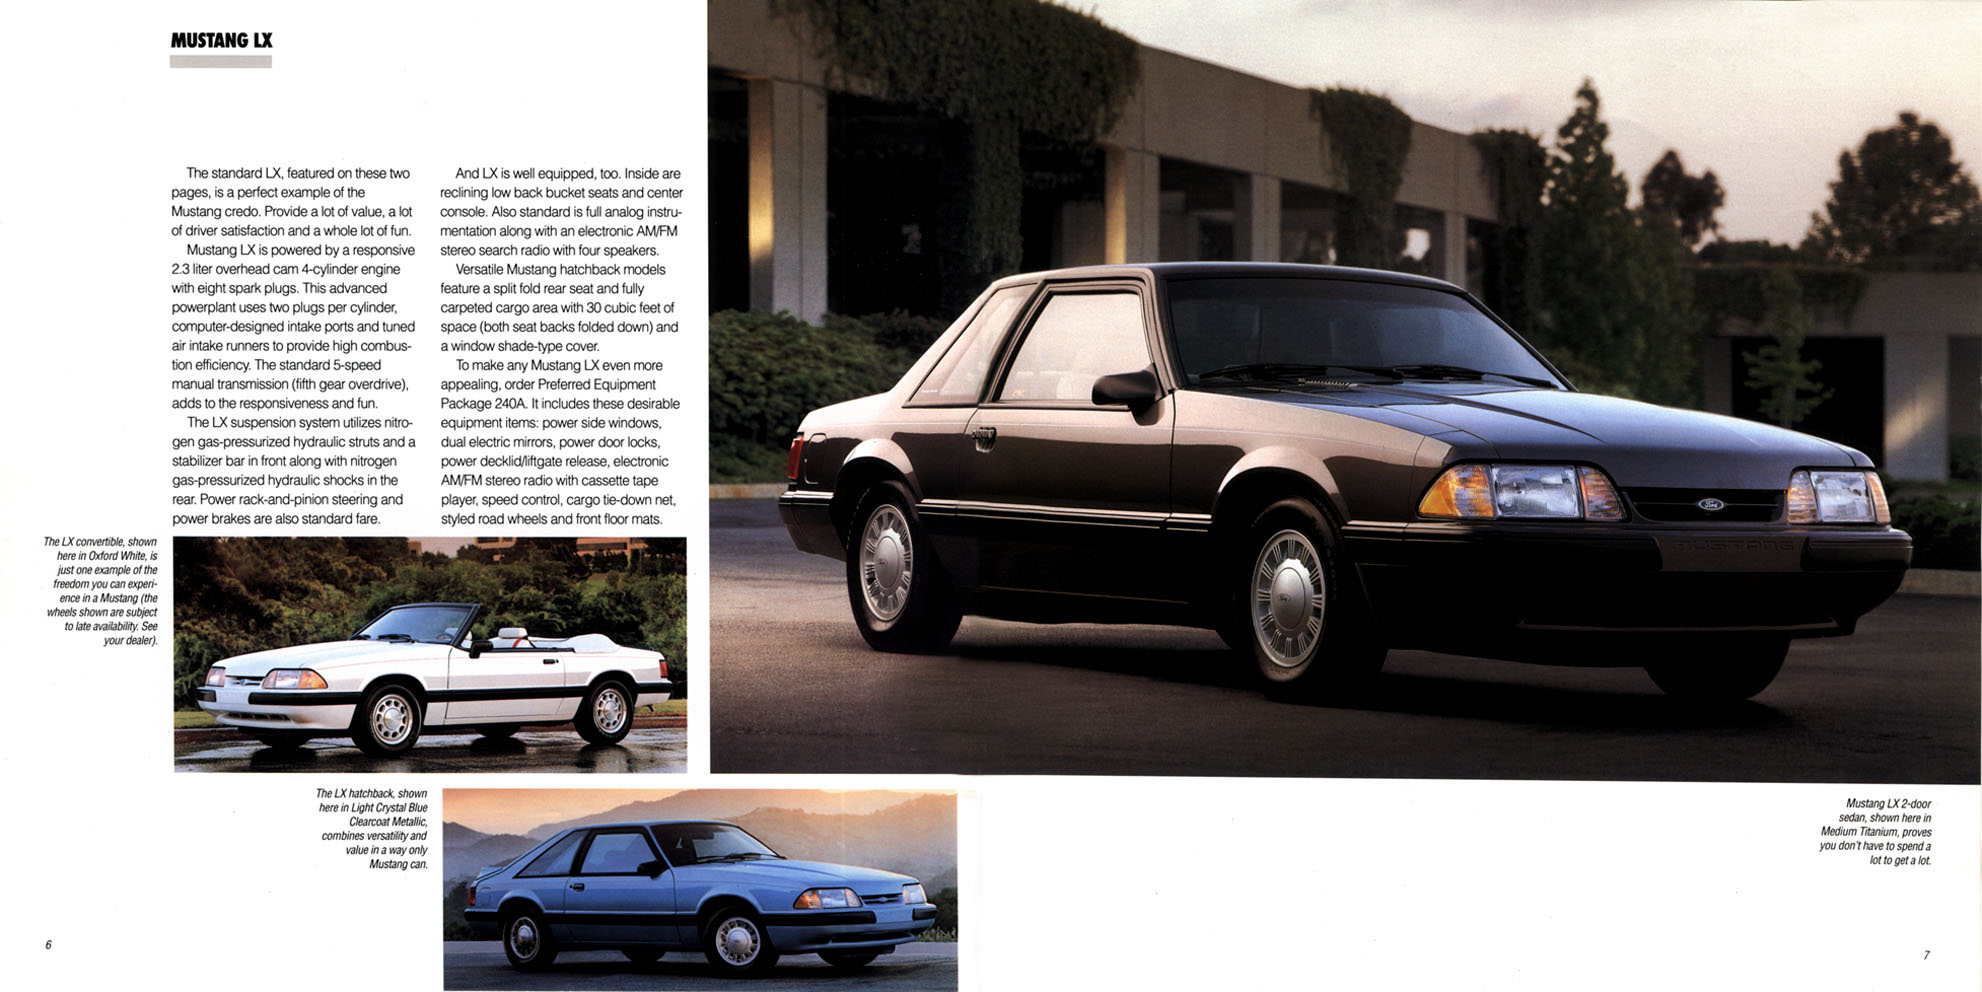 1991_Ford_Mustang-06-07